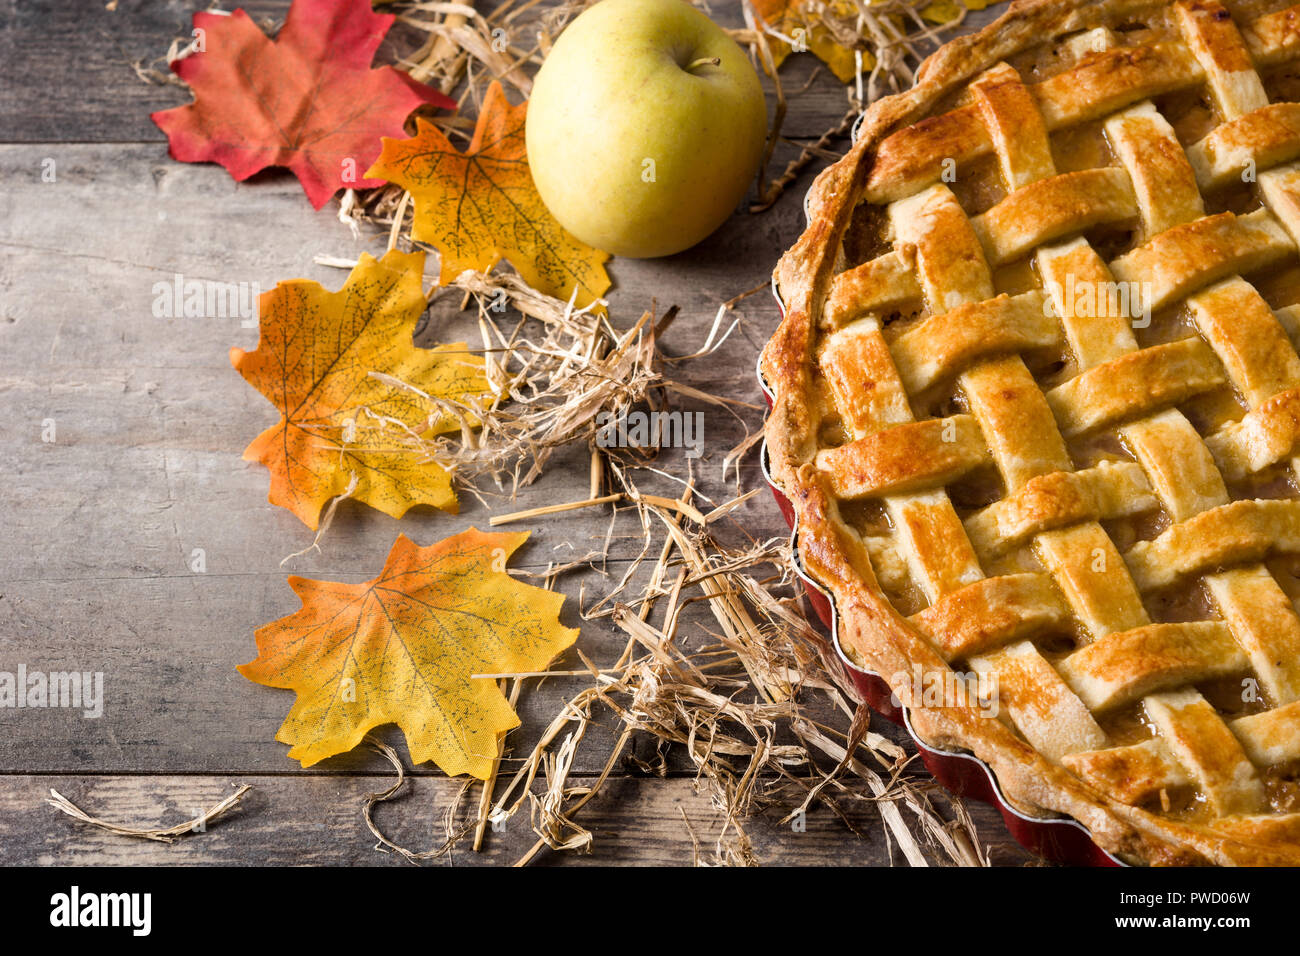 Homemade apple pie on wooden table. Top view. Copyspace Stock Photo